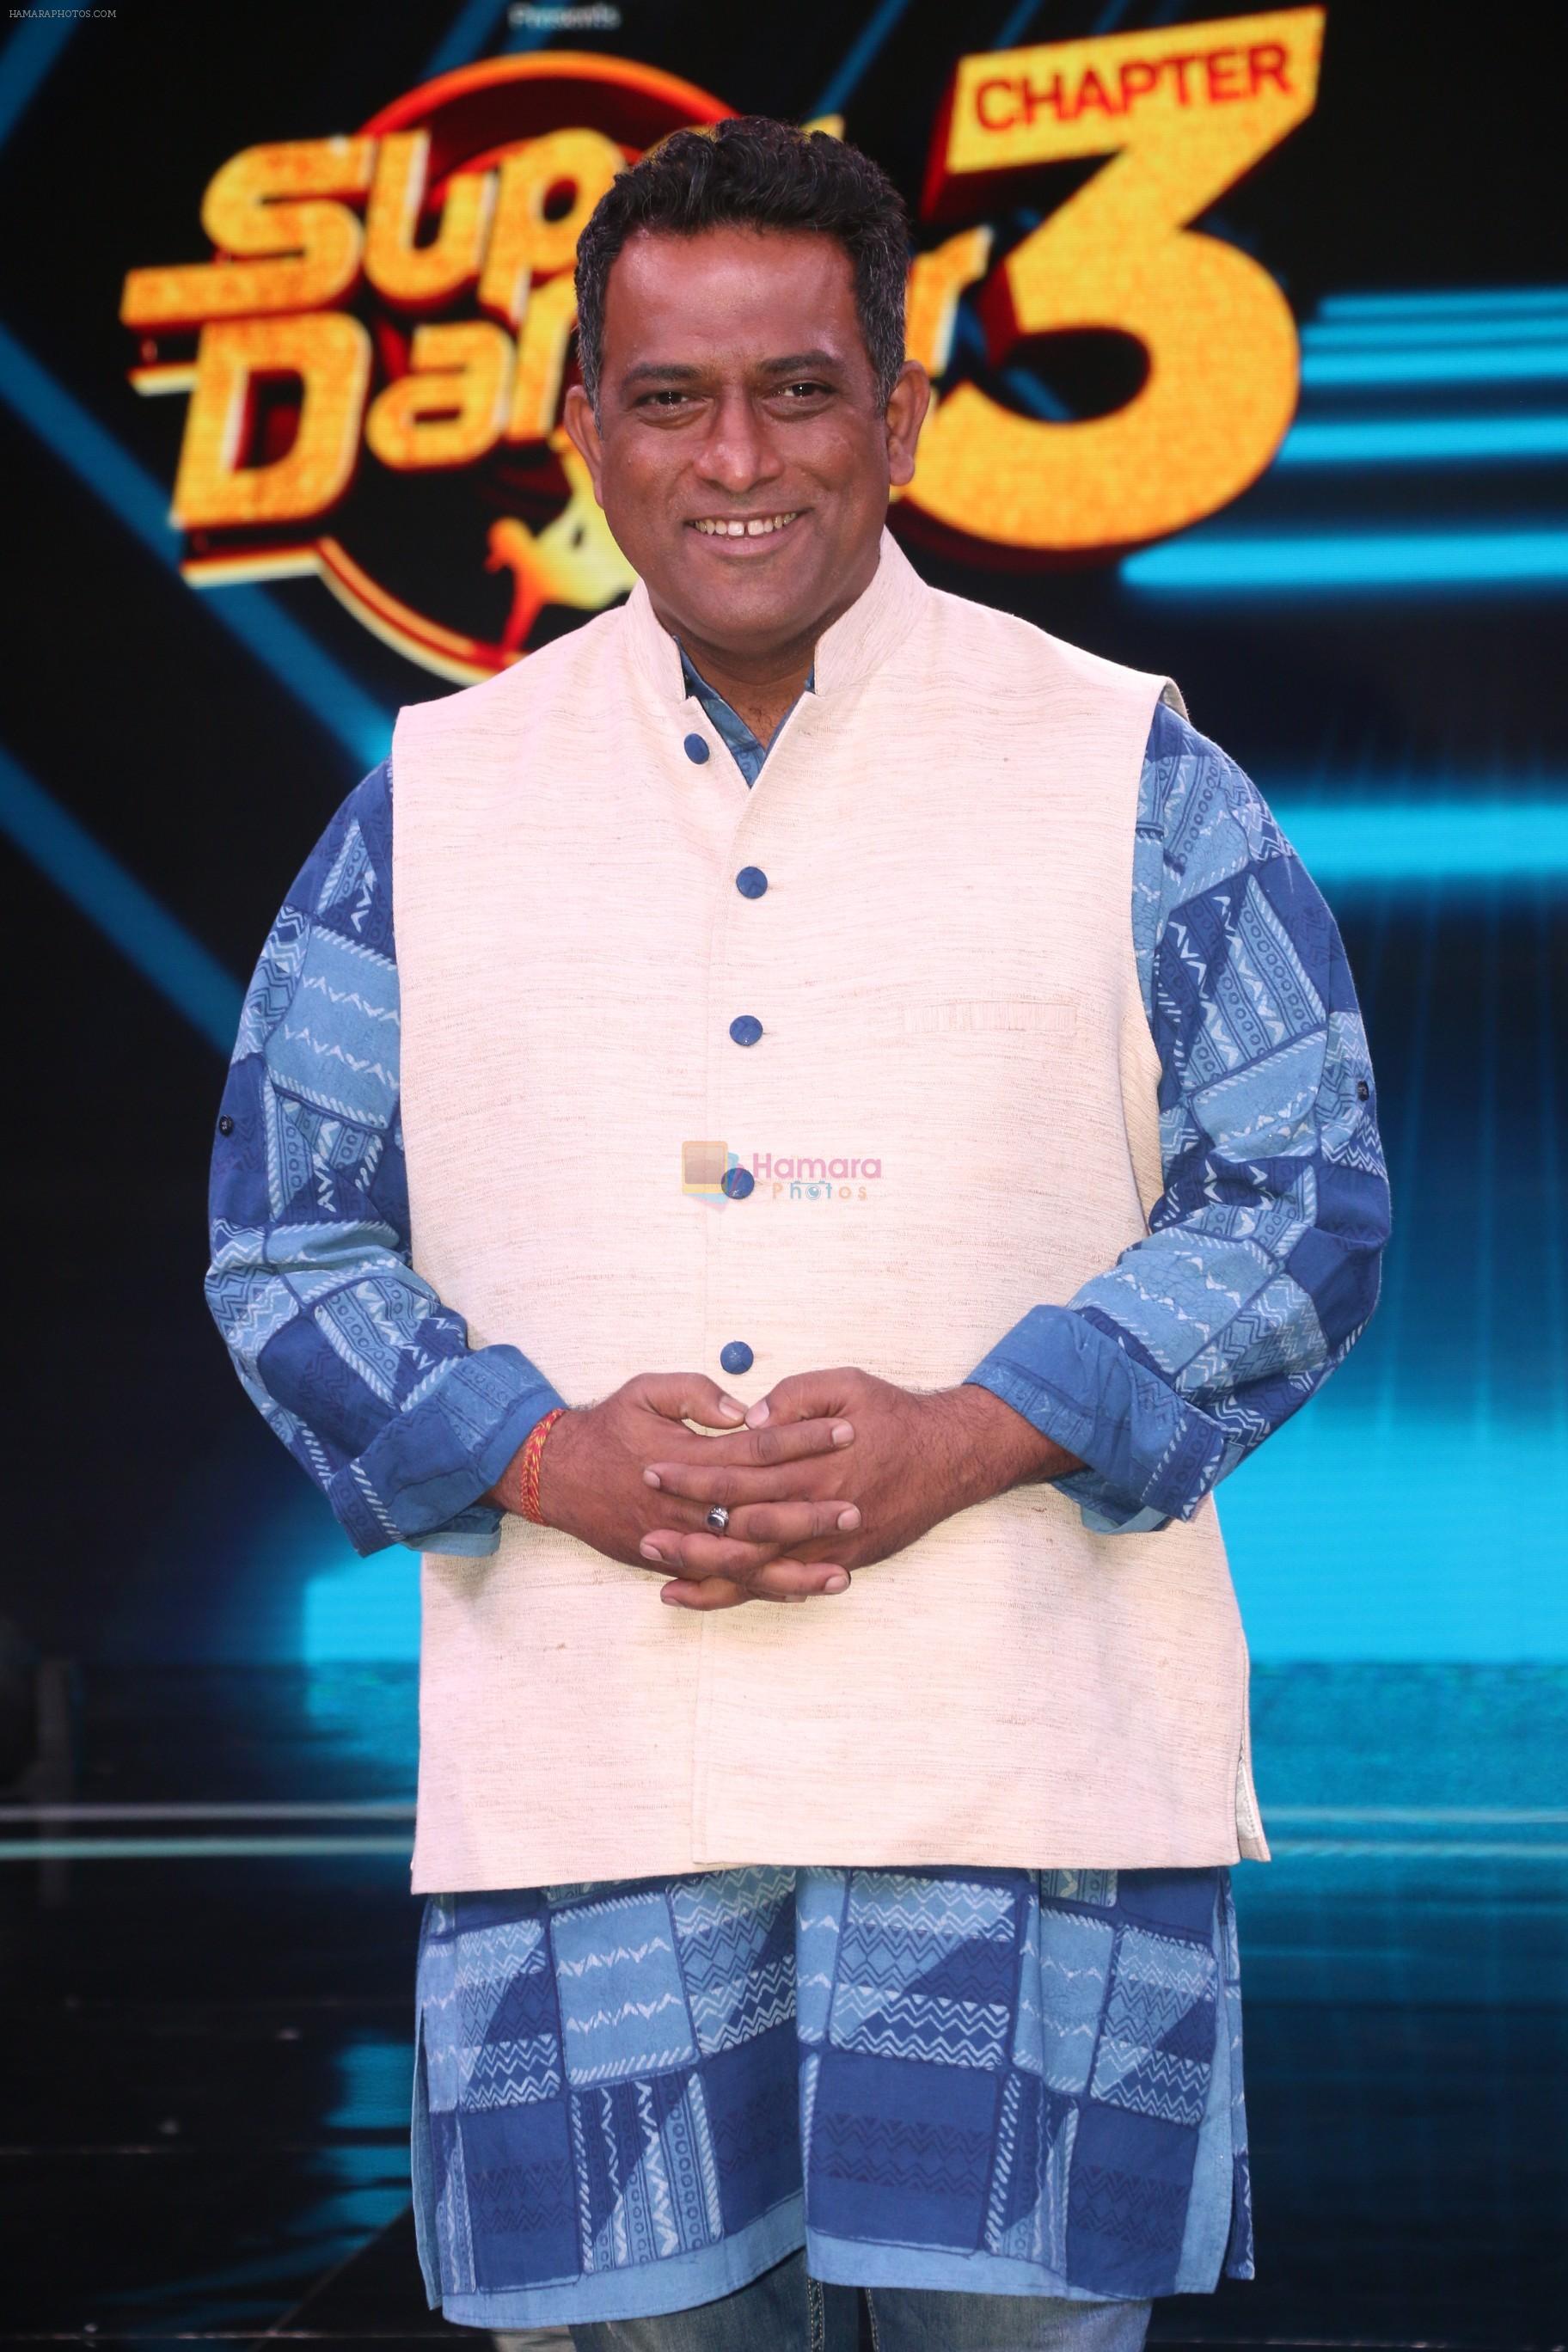 Anurag Basu at the Launch of Super Dancer Chapter 3 in Reliance studio filmcity goregaon on 19th Dec 2018